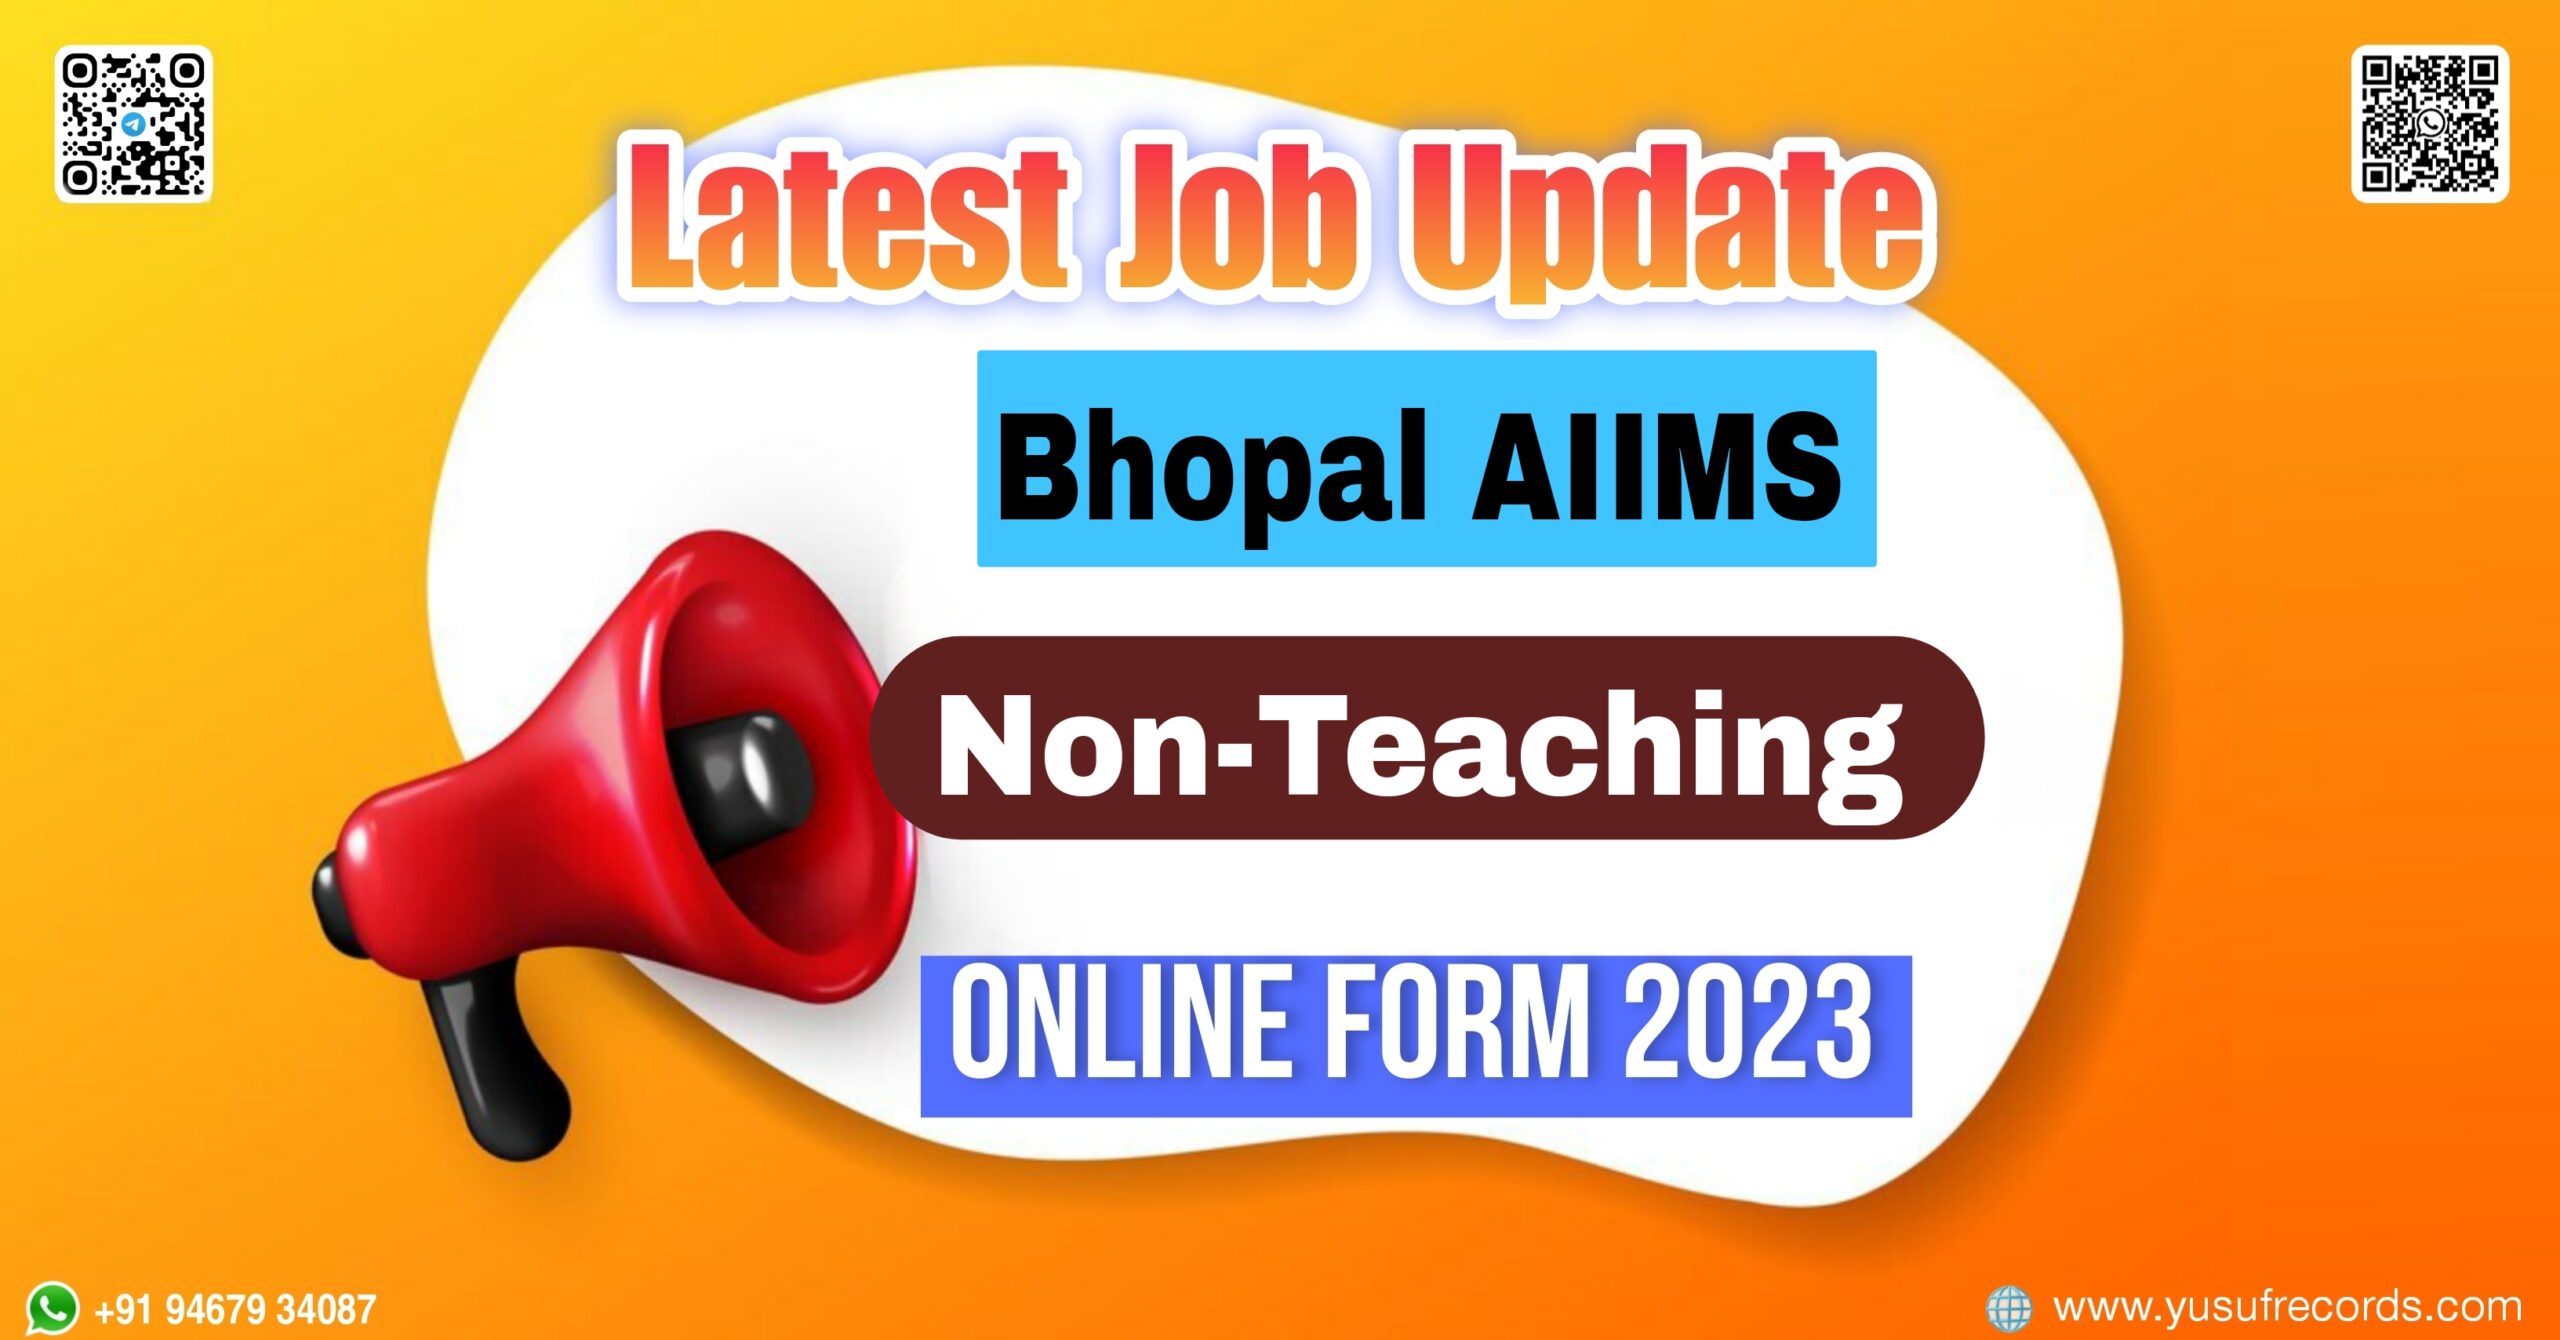 Bhopal AIIMS Non-Teaching Online Form yusufrecords